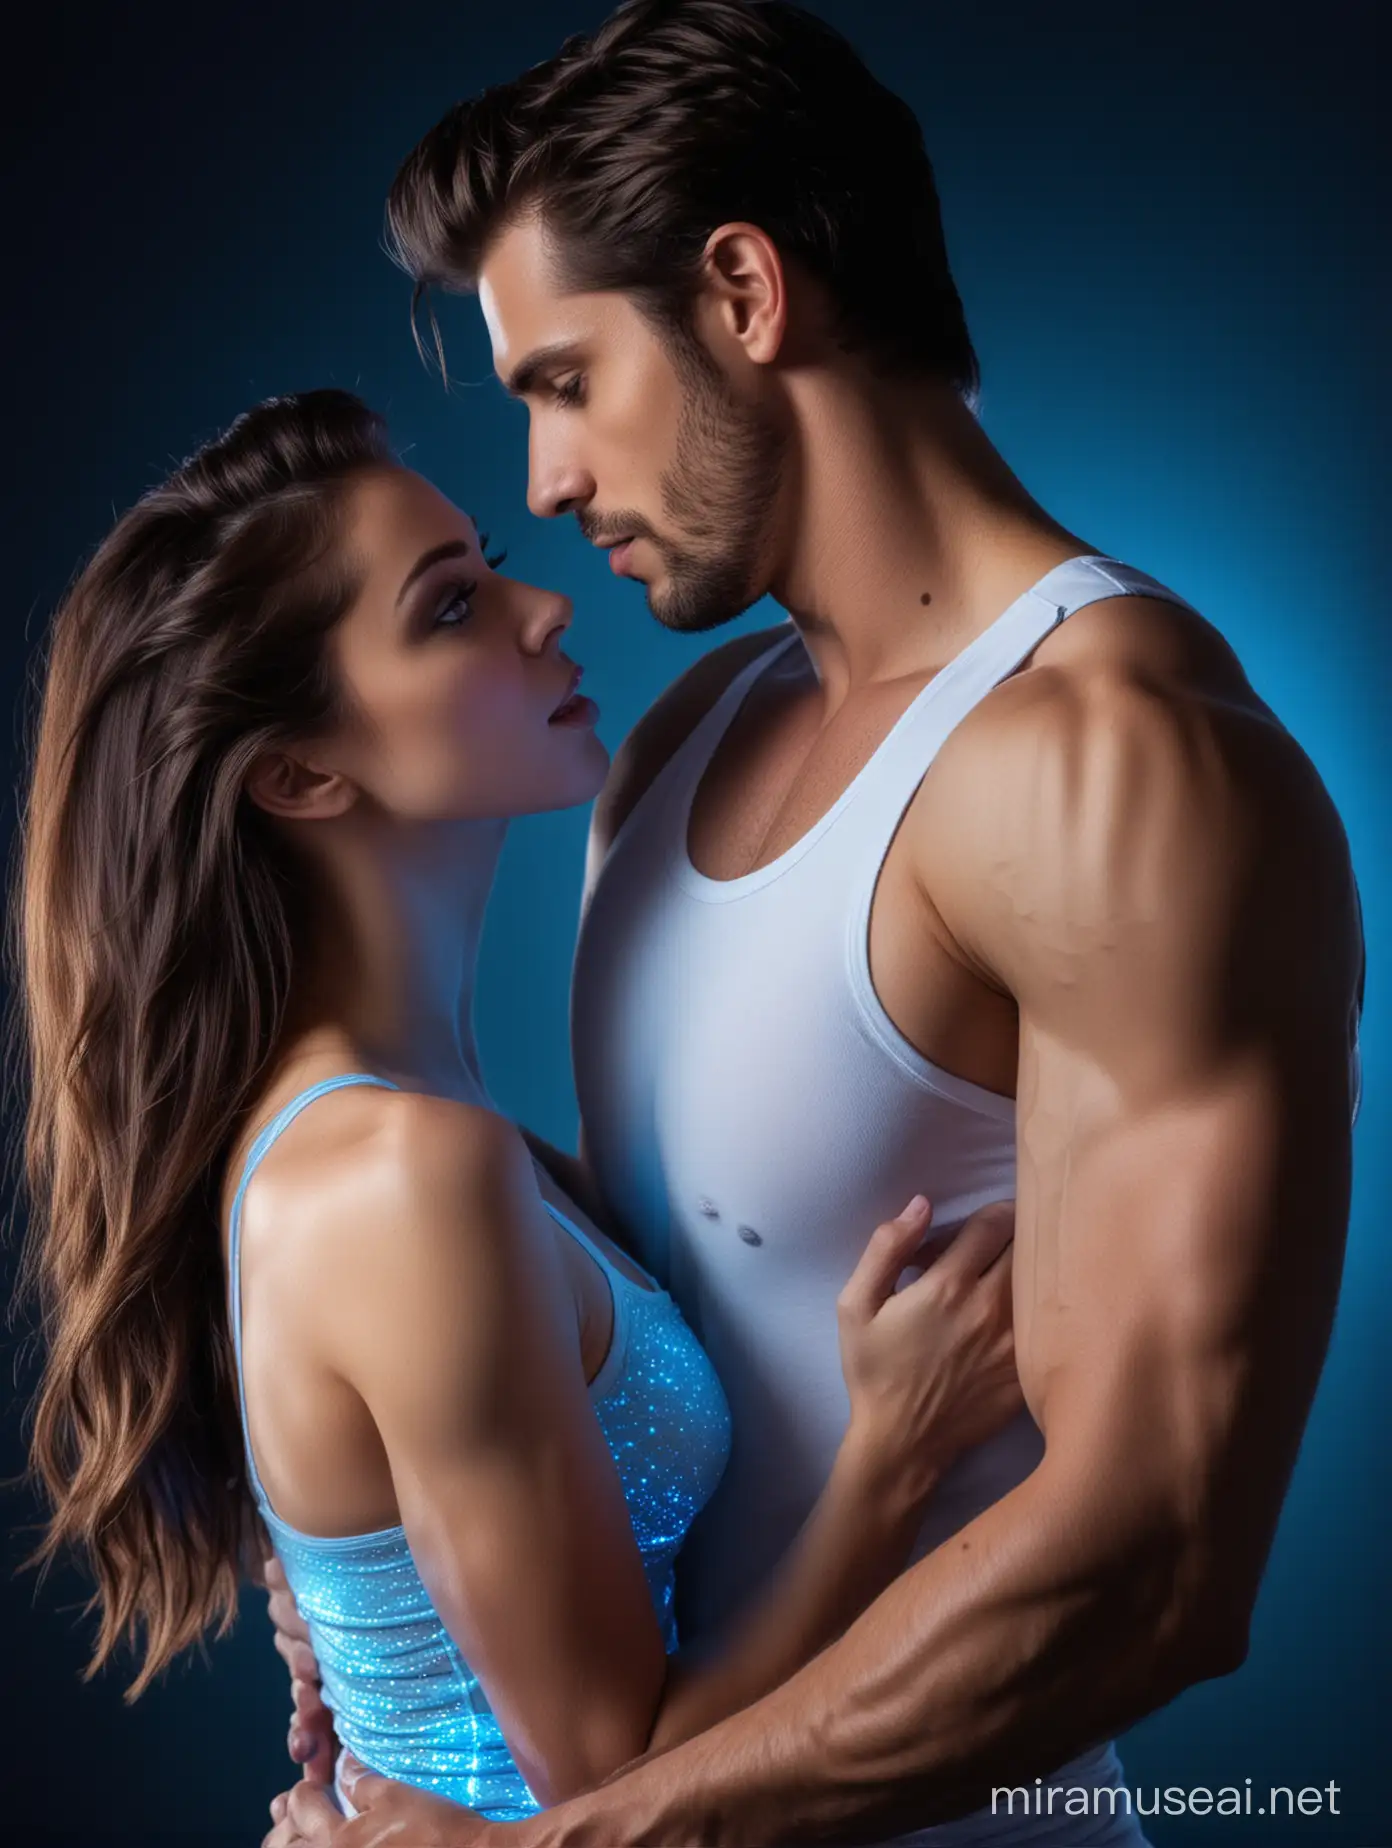 A sexy beautiful lady held romantically by a hot handsome young man in singlet, with a blue luminous light behind them